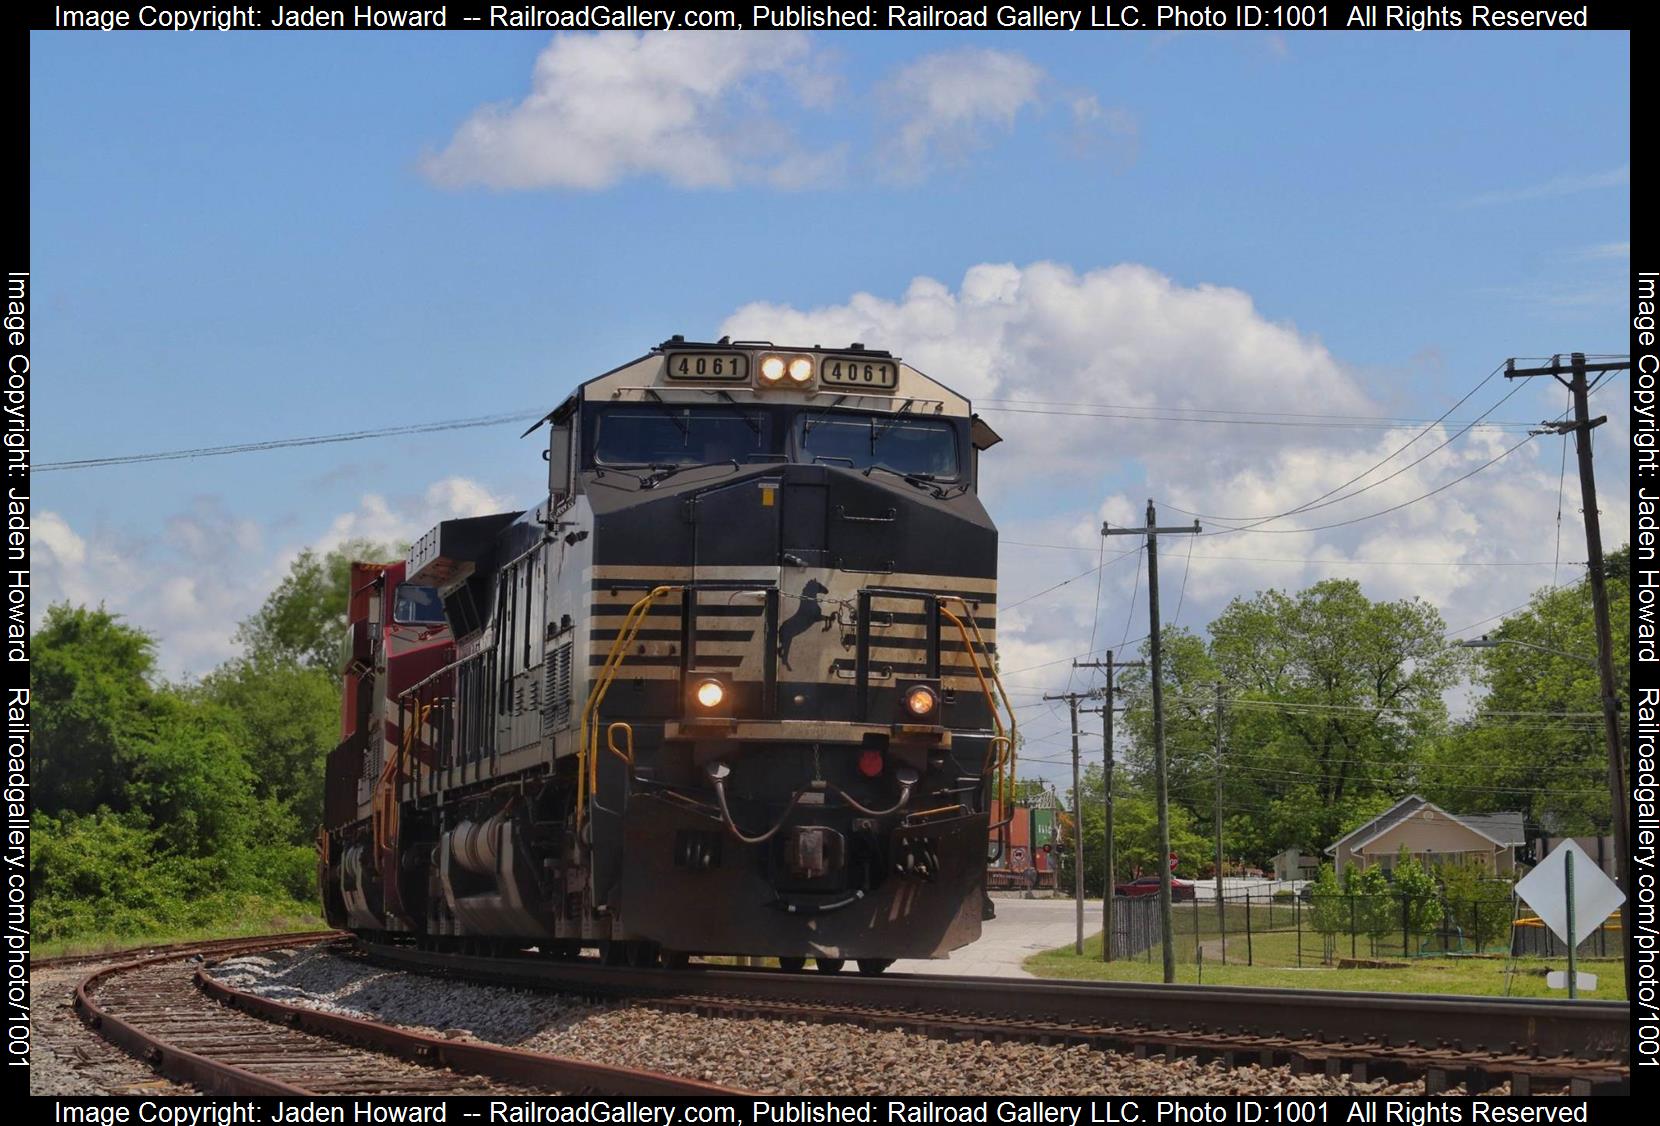 NS 4061  is a class GE ES44AC and  is pictured in Greer , South Carolina , USA.  This was taken along the Piedmont Division/Charlotte District  on the Norfolk Southern. Photo Copyright: Jaden Howard  uploaded to Railroad Gallery on 04/27/2023. This photograph of NS 4061  was taken on Thursday, April 27, 2023. All Rights Reserved. 